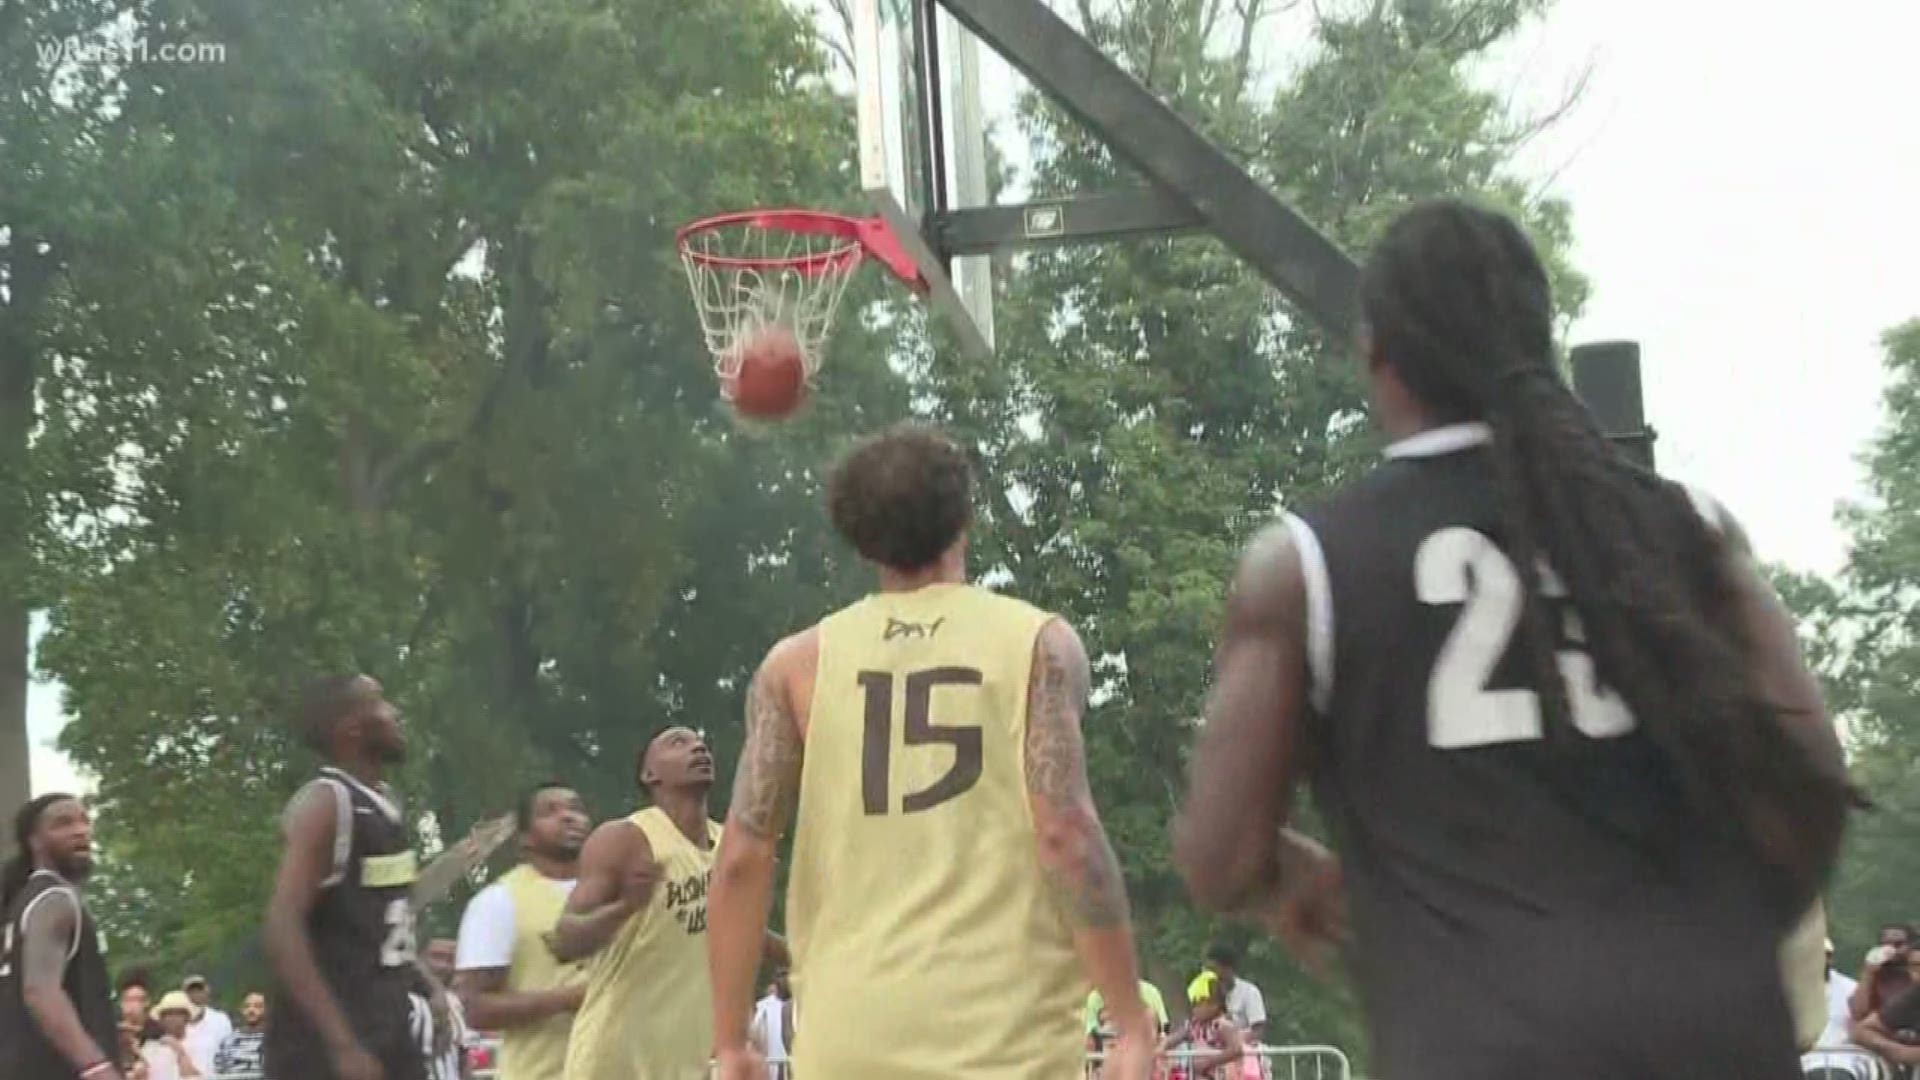 The Dirt Bowl continues its rich tradition of community basketball in west Louisville, 50 years after it was started due to troubled times in our nation.